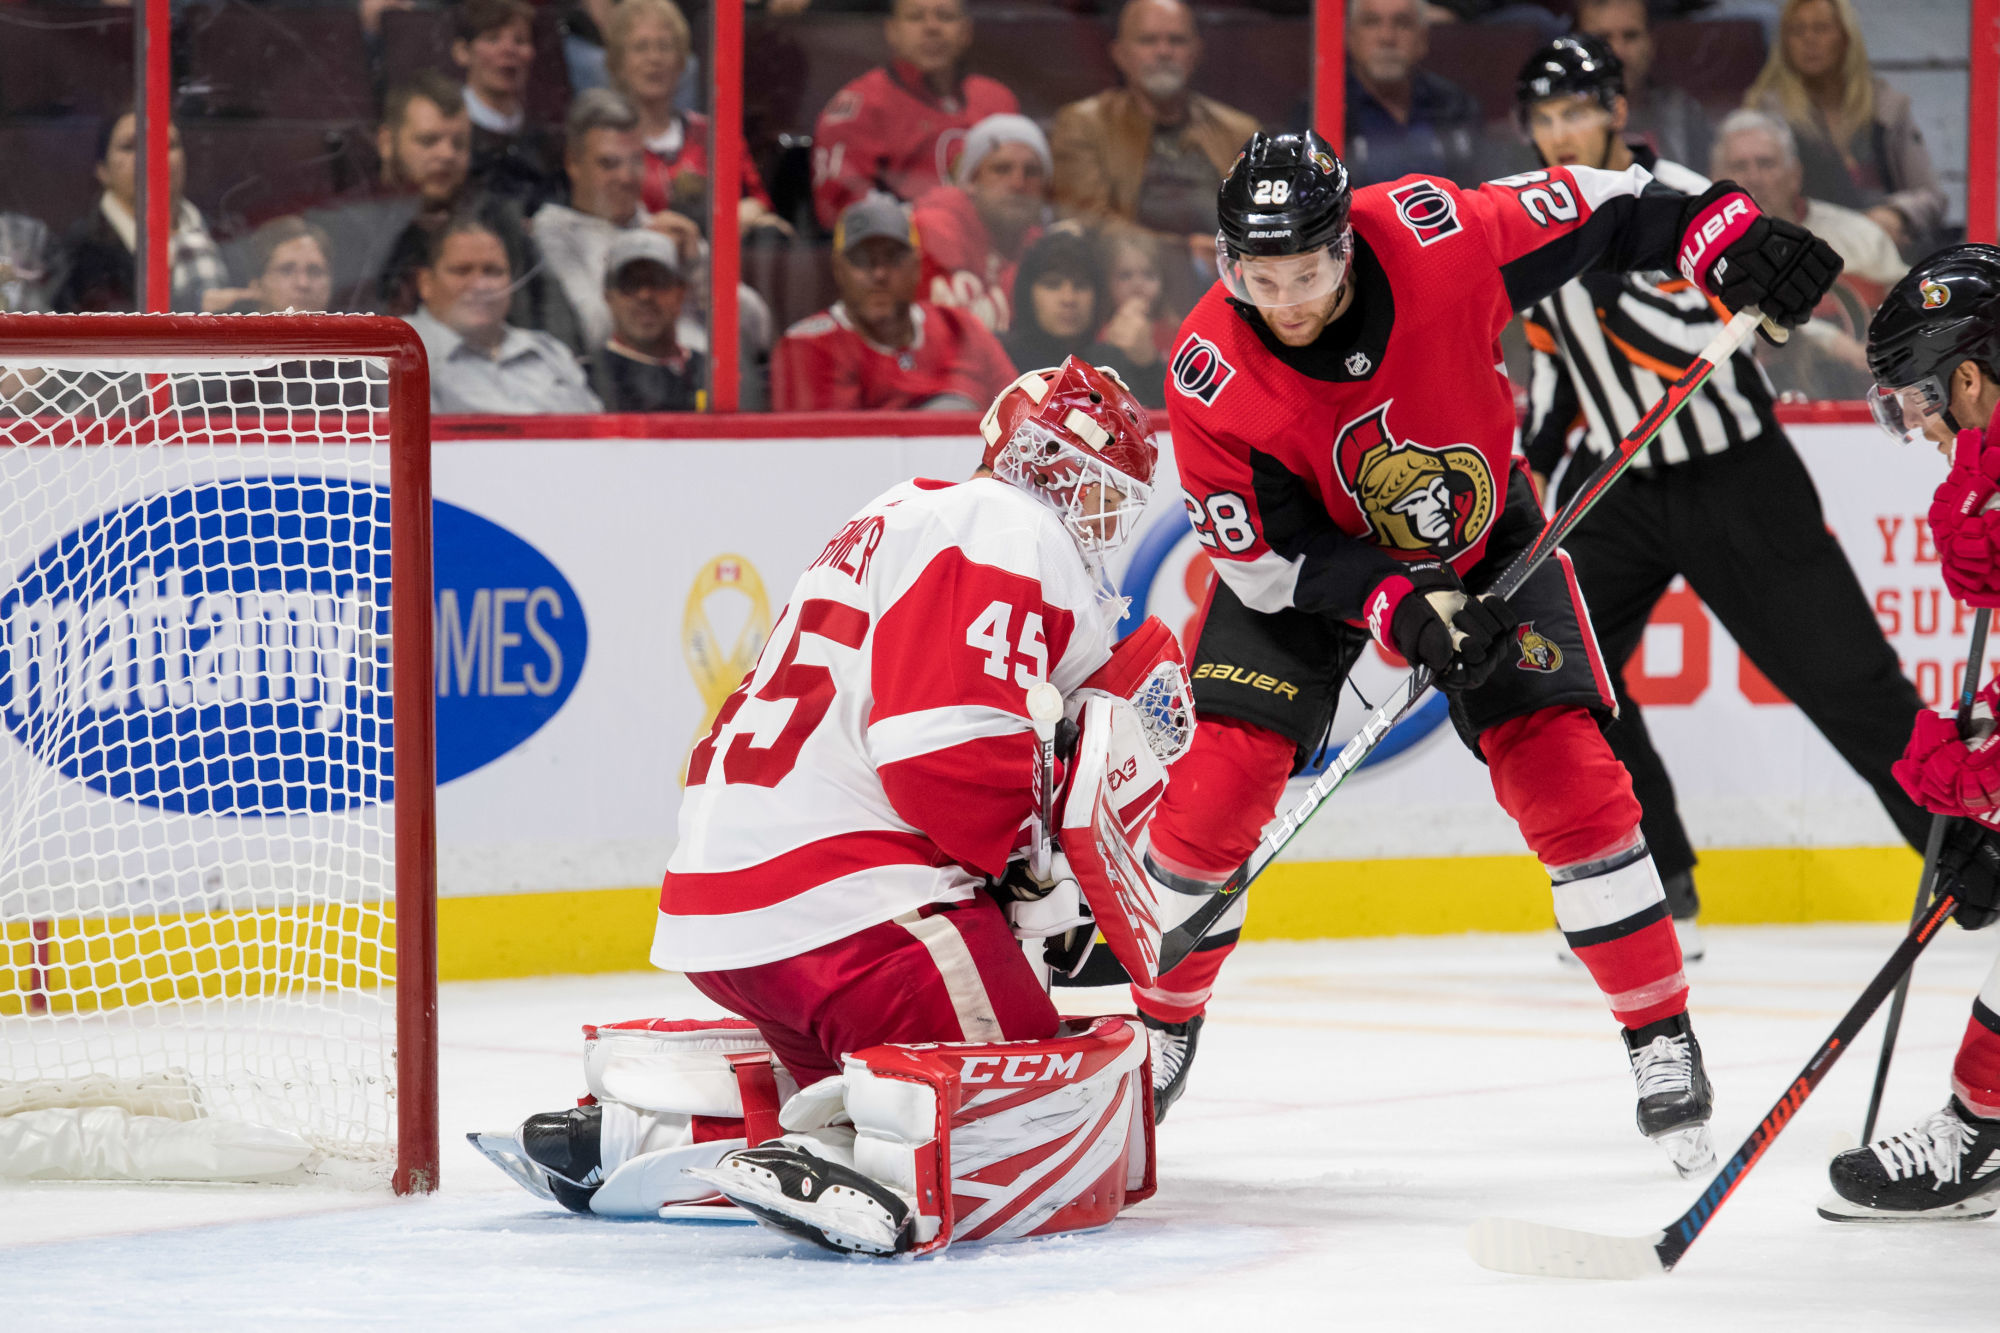 Oct 23, 2019; Ottawa, Ontario, CAN; Detroit Red Wings goalie Jonathan Bernier (45) makes a save in front of Ottawa Senators right wing Connor Brown (28) in the second period at the Canadian Tire Centre. Mandatory Credit: Marc DesRosiers-USA TODAY Sports 

Photo by Icon Sport - Jonathan BERNIER - Connor BROWN - Ottawa Senators - Ottawa (Canada)